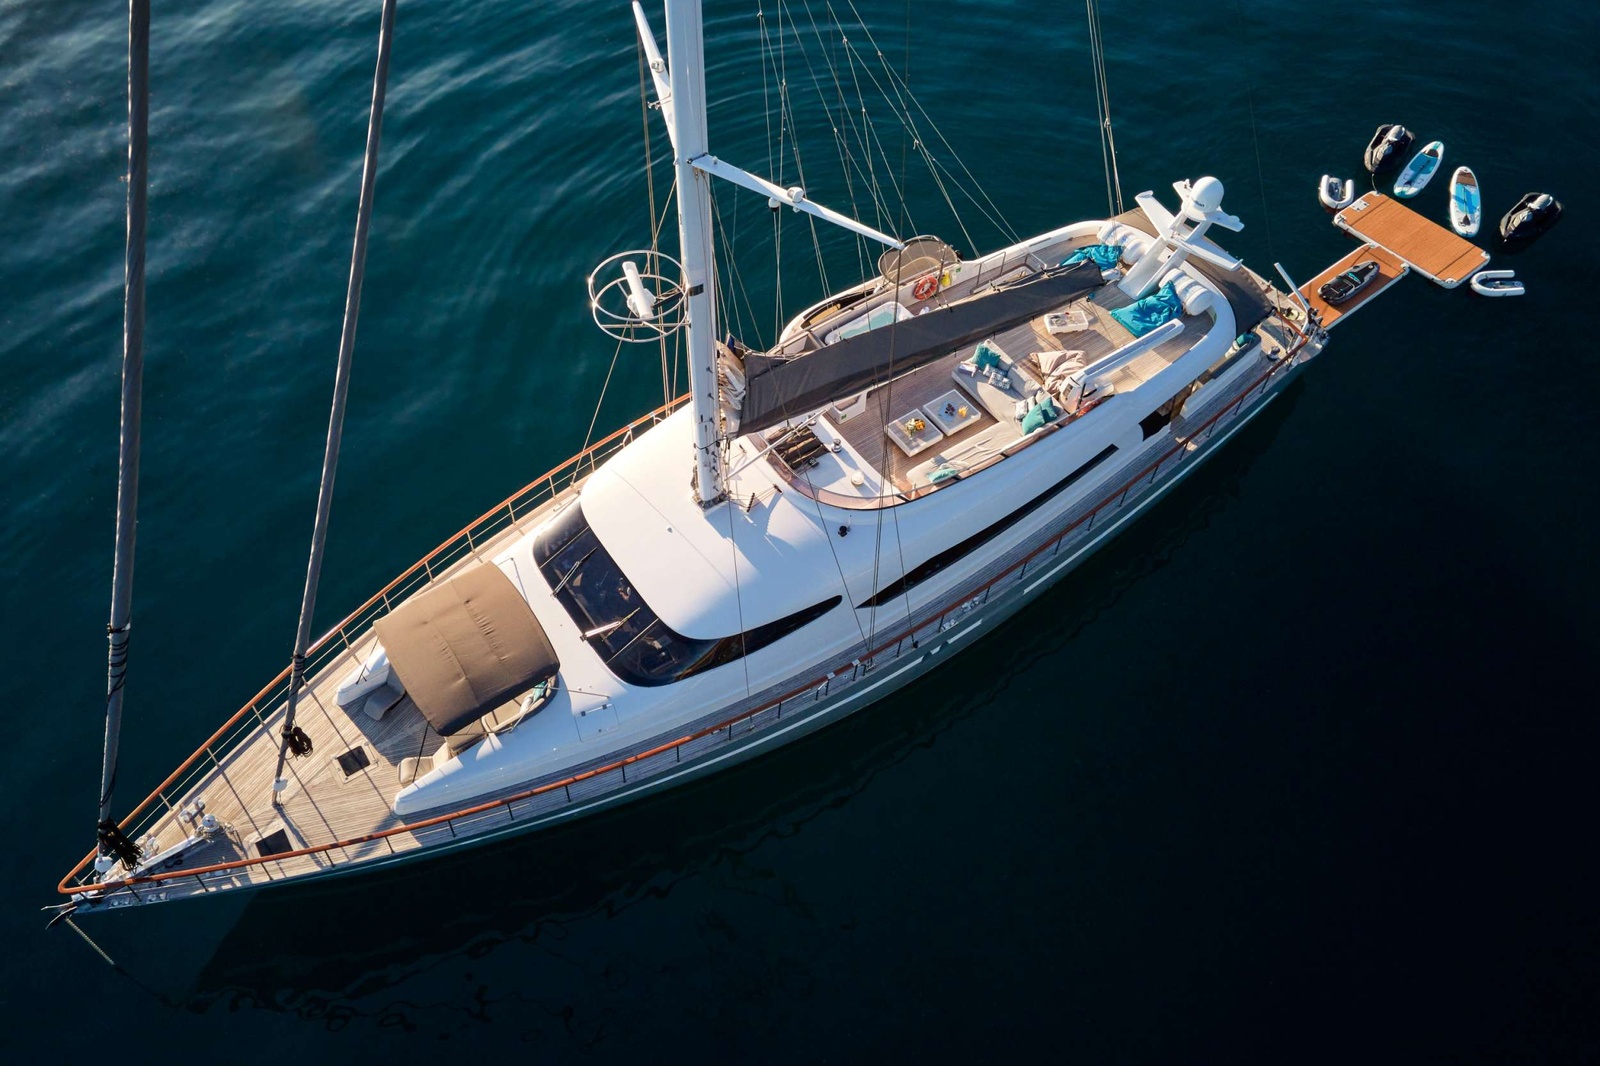 SAN LiMits a luxury 34-meter sailing yacht that had a complete refit in 2018 in Croatia, with additional updates over the following years, such as jacuzzi and additional deck furniture on the flybridge. This elegant and luxury vessel offers all the comfort and equipment of a motor yacht and the great sailing experience of a sailing yacht. The décor is stylish and elegant. 

Her crew is a local team with great knowledge of the area. 

Her impressive leisure and entertainment facilities make her an ideal charter yacht for socialising and entertaining with family and friends. 

VIRTUAL TOUR: http://www.virtualtour.hr/sanlimi/ 

SAN LiMi offers accommodation for up to 8 guests: 
- Master cabin with a king size bed 
- VIP cabin with a king size bed 
- One double cabin with a queen size bed 
- One twin cabin with two single beds (convertible into double bed) 

Each cabin has an en-suite bathroom. San LiMi has three crew cabins for up to six crew members. 

The water toys selection matches a super yacht's. LAMPUGA JETSURF and two electric scooters are the latest additions to the collection. 

Here is what we’ve learned about SAN LIMI: 
'It is always a love song when anyone talks about SAN LIMI. This yacht has earned her good-time vibe ... it's something about her infectious energy, the destinations she goes to, the feasts, the laughs, her charming crew. It's like living the dream!' 
